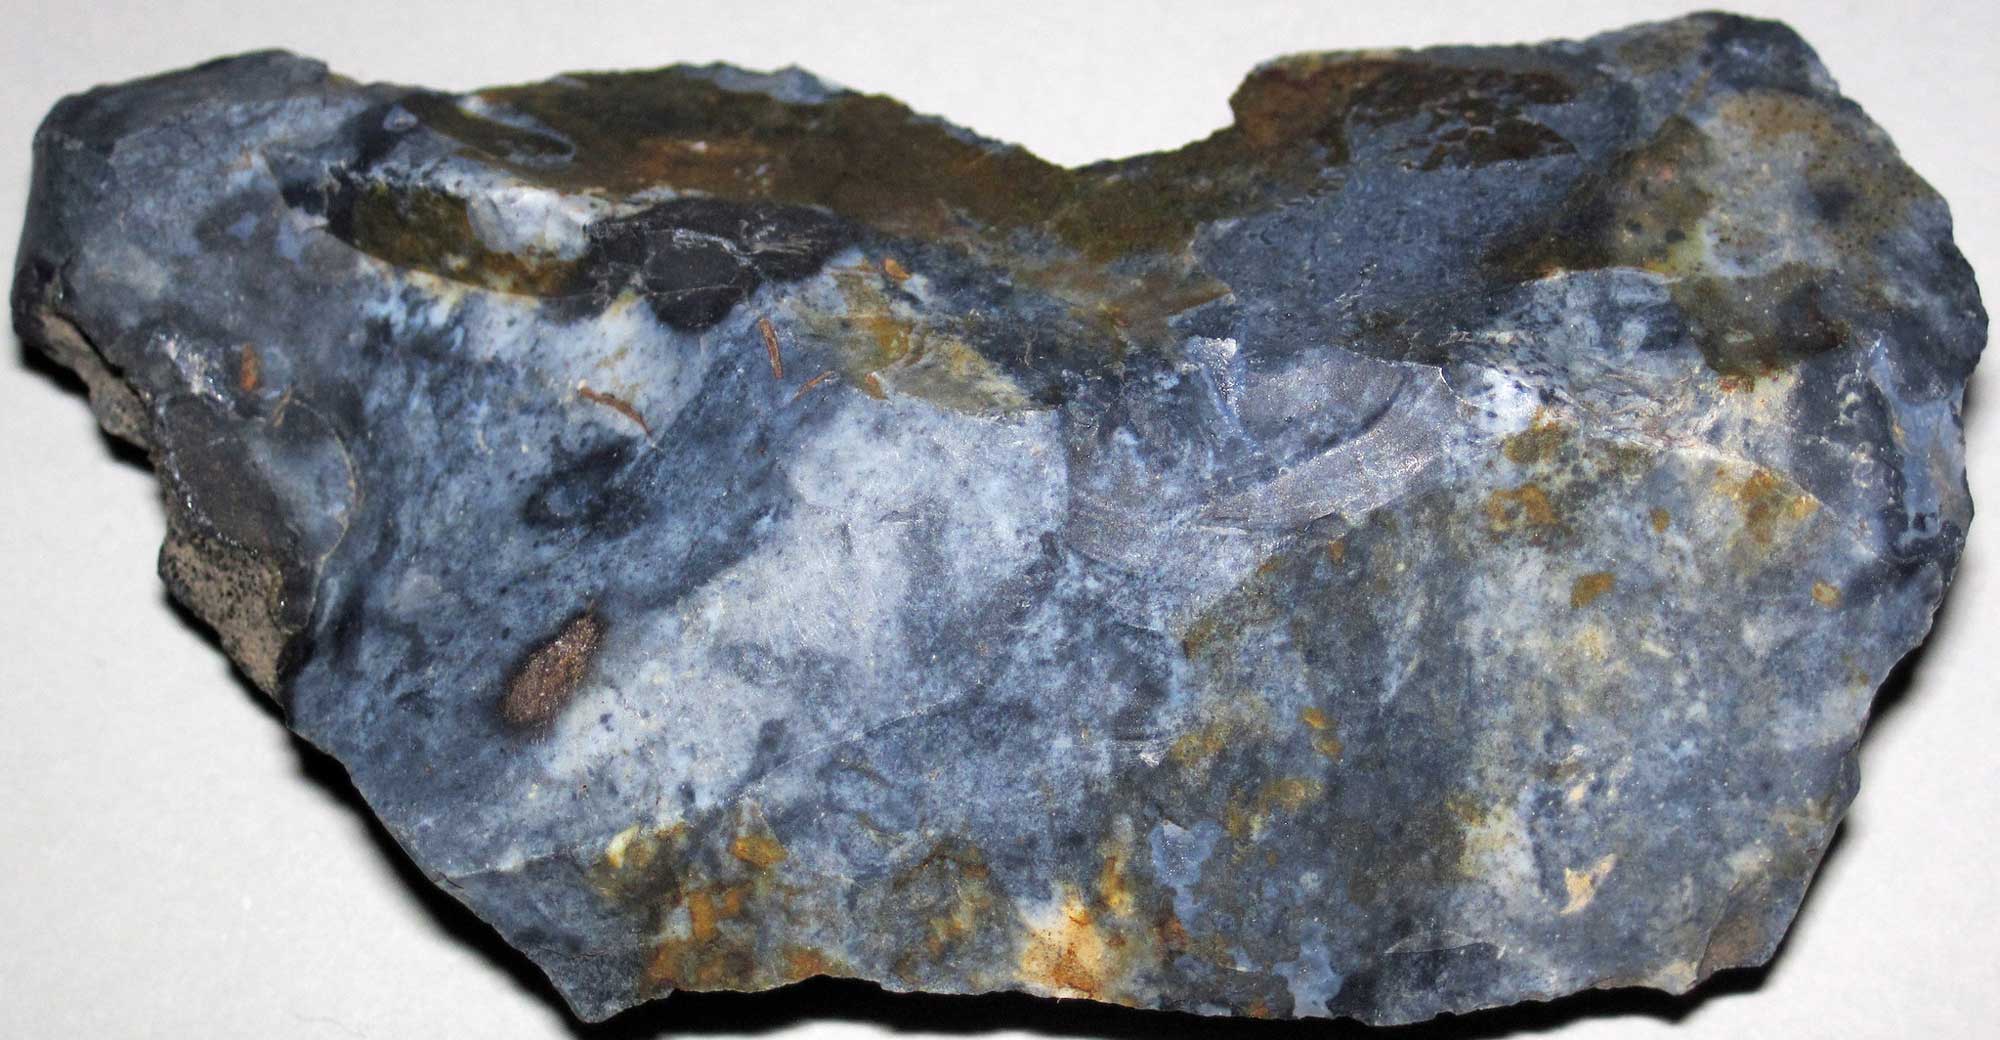 Photograph of a sample of blue-colored flint from Ohio.